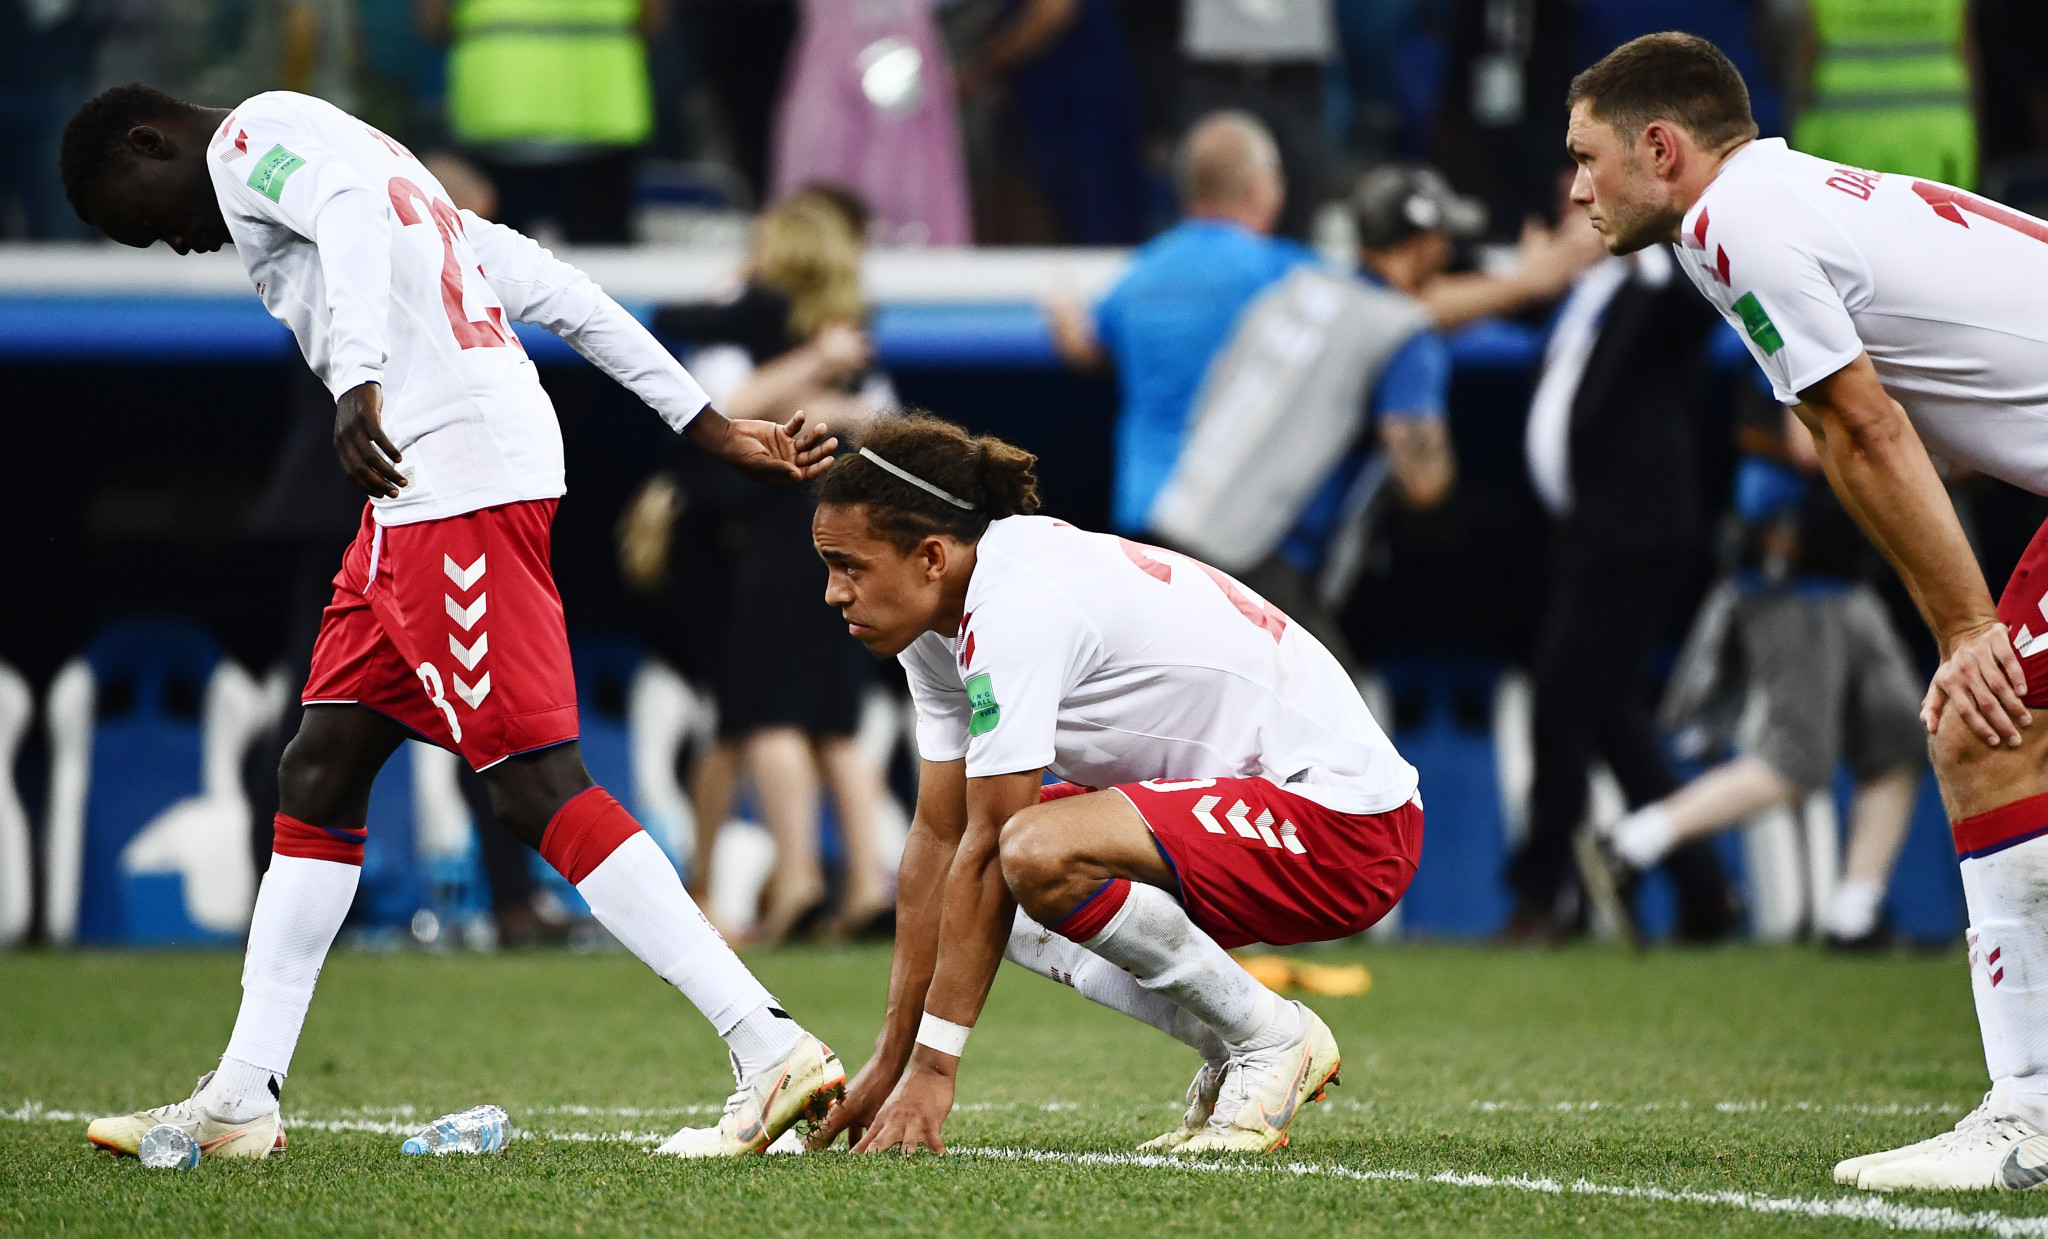 Denmark sink to the ground after their agonising defeat ©Getty Images